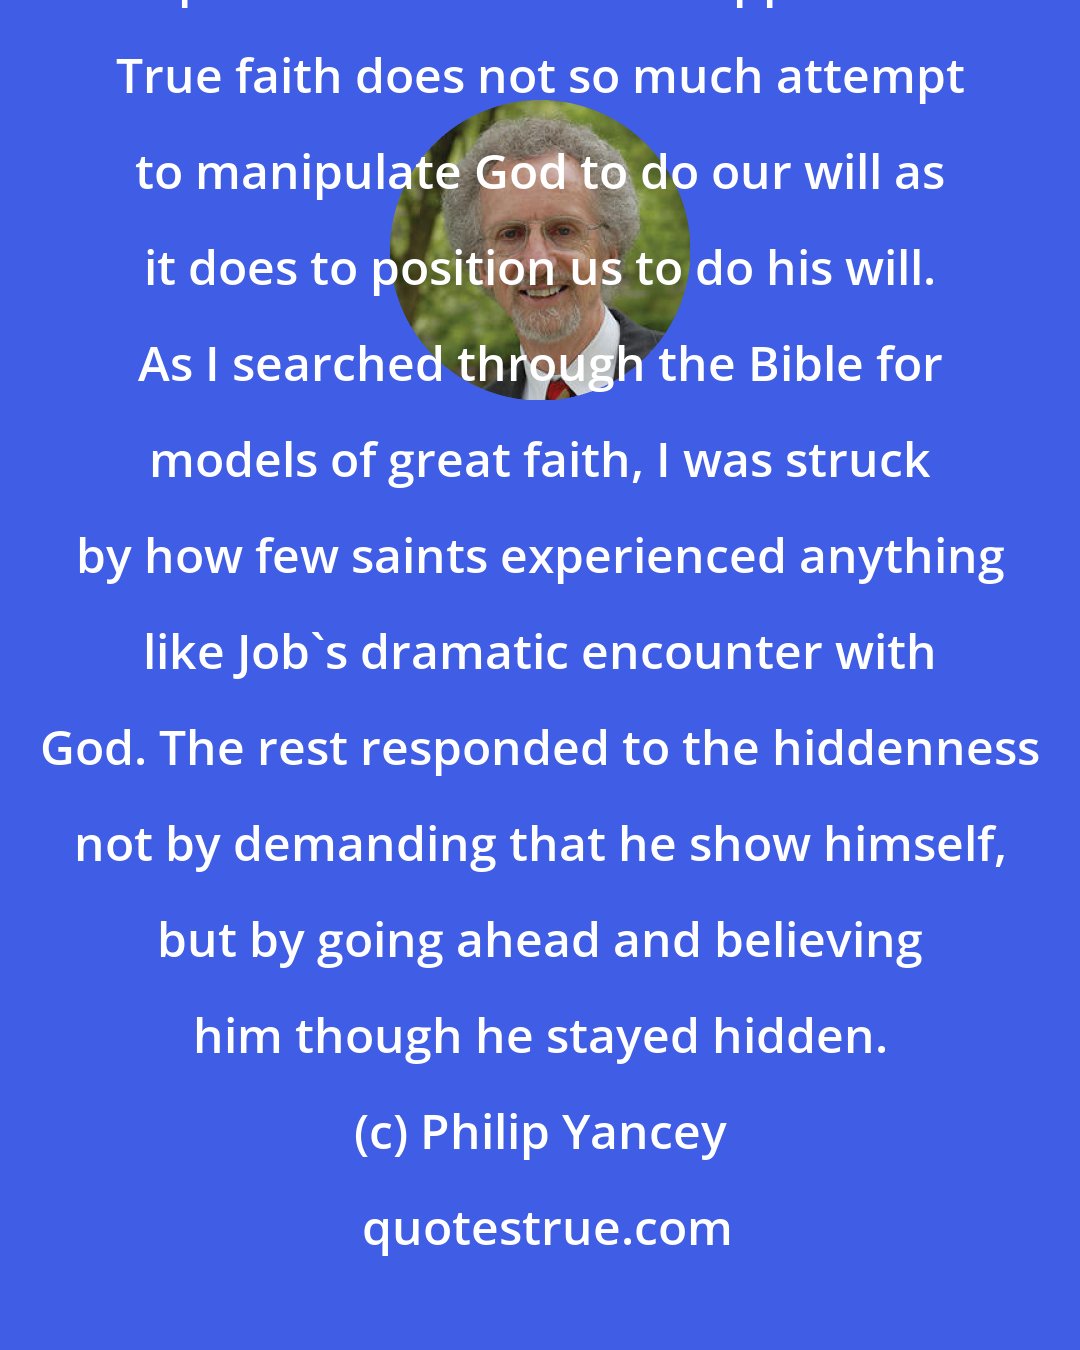 Philip Yancey: If we insist on visible proofs from God, we may well prepare the way for a permanent state of disappointment. True faith does not so much attempt to manipulate God to do our will as it does to position us to do his will. As I searched through the Bible for models of great faith, I was struck by how few saints experienced anything like Job's dramatic encounter with God. The rest responded to the hiddenness not by demanding that he show himself, but by going ahead and believing him though he stayed hidden.